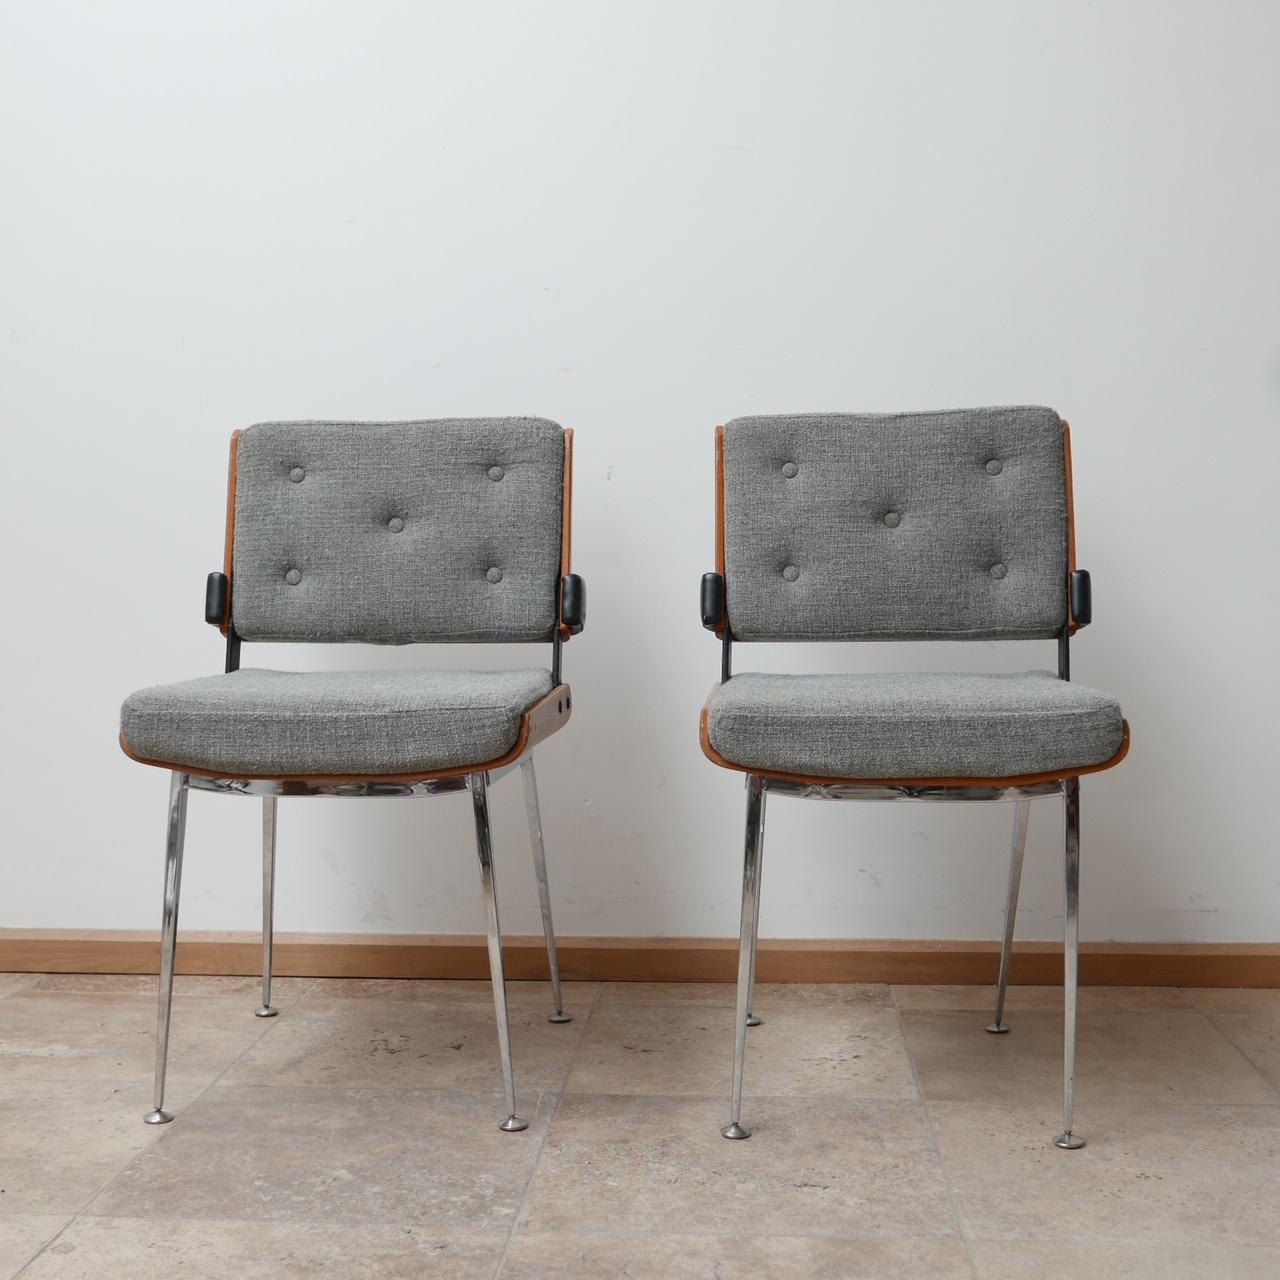 20th Century Mid-Century French Desk Chairs by Alain Richard '2'